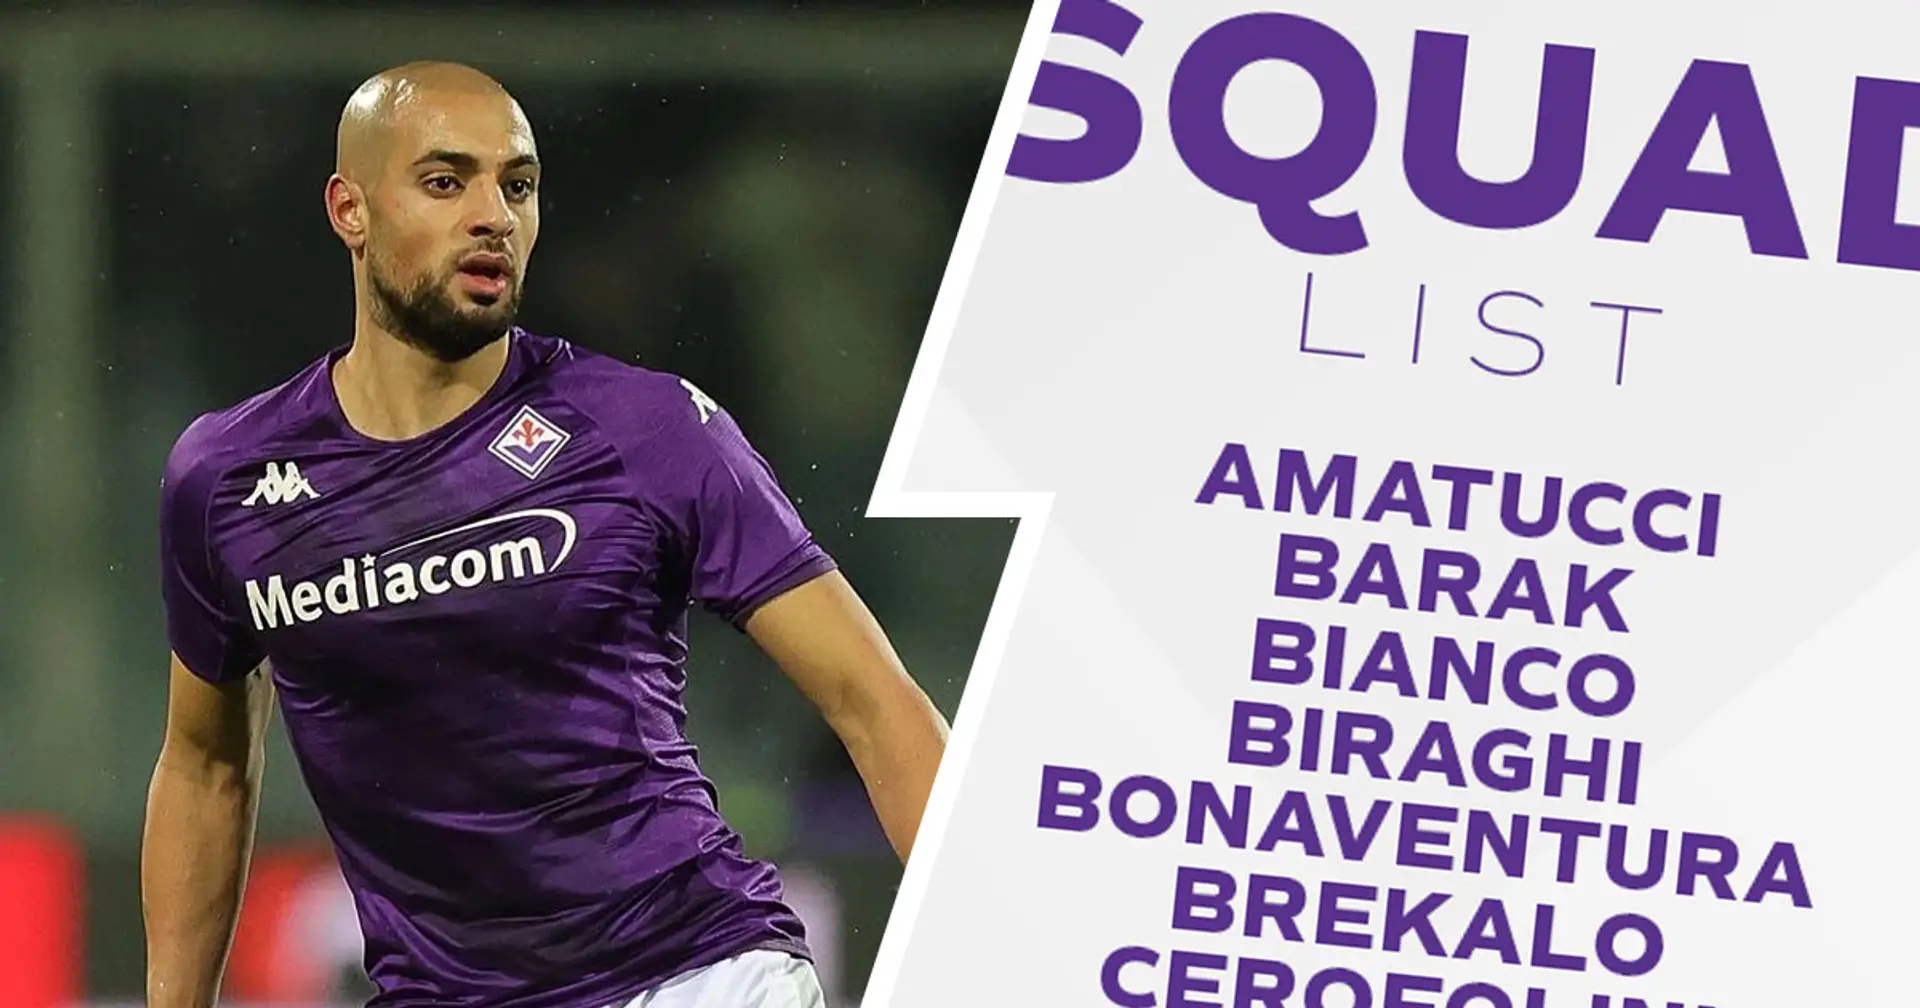 Amrabat out of Fiorentina's matchday squad for tomorrow, player's agents claim Barca move 'still possible'